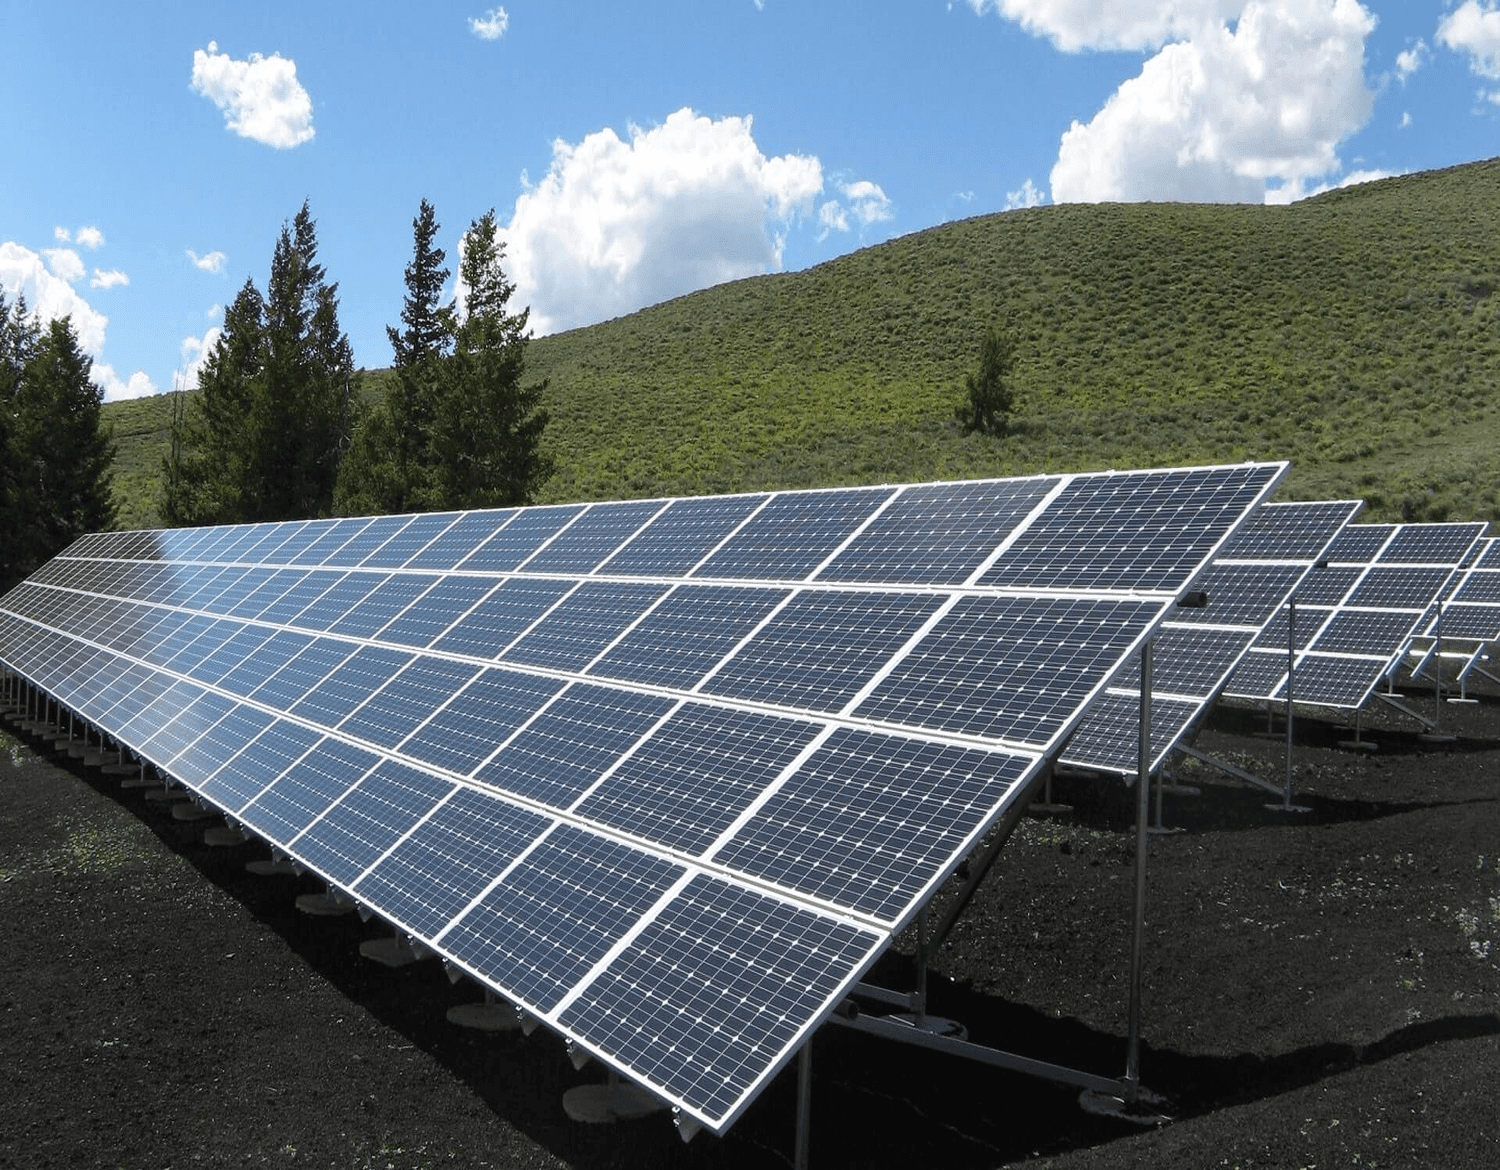 Solar panels for pollution-free environment